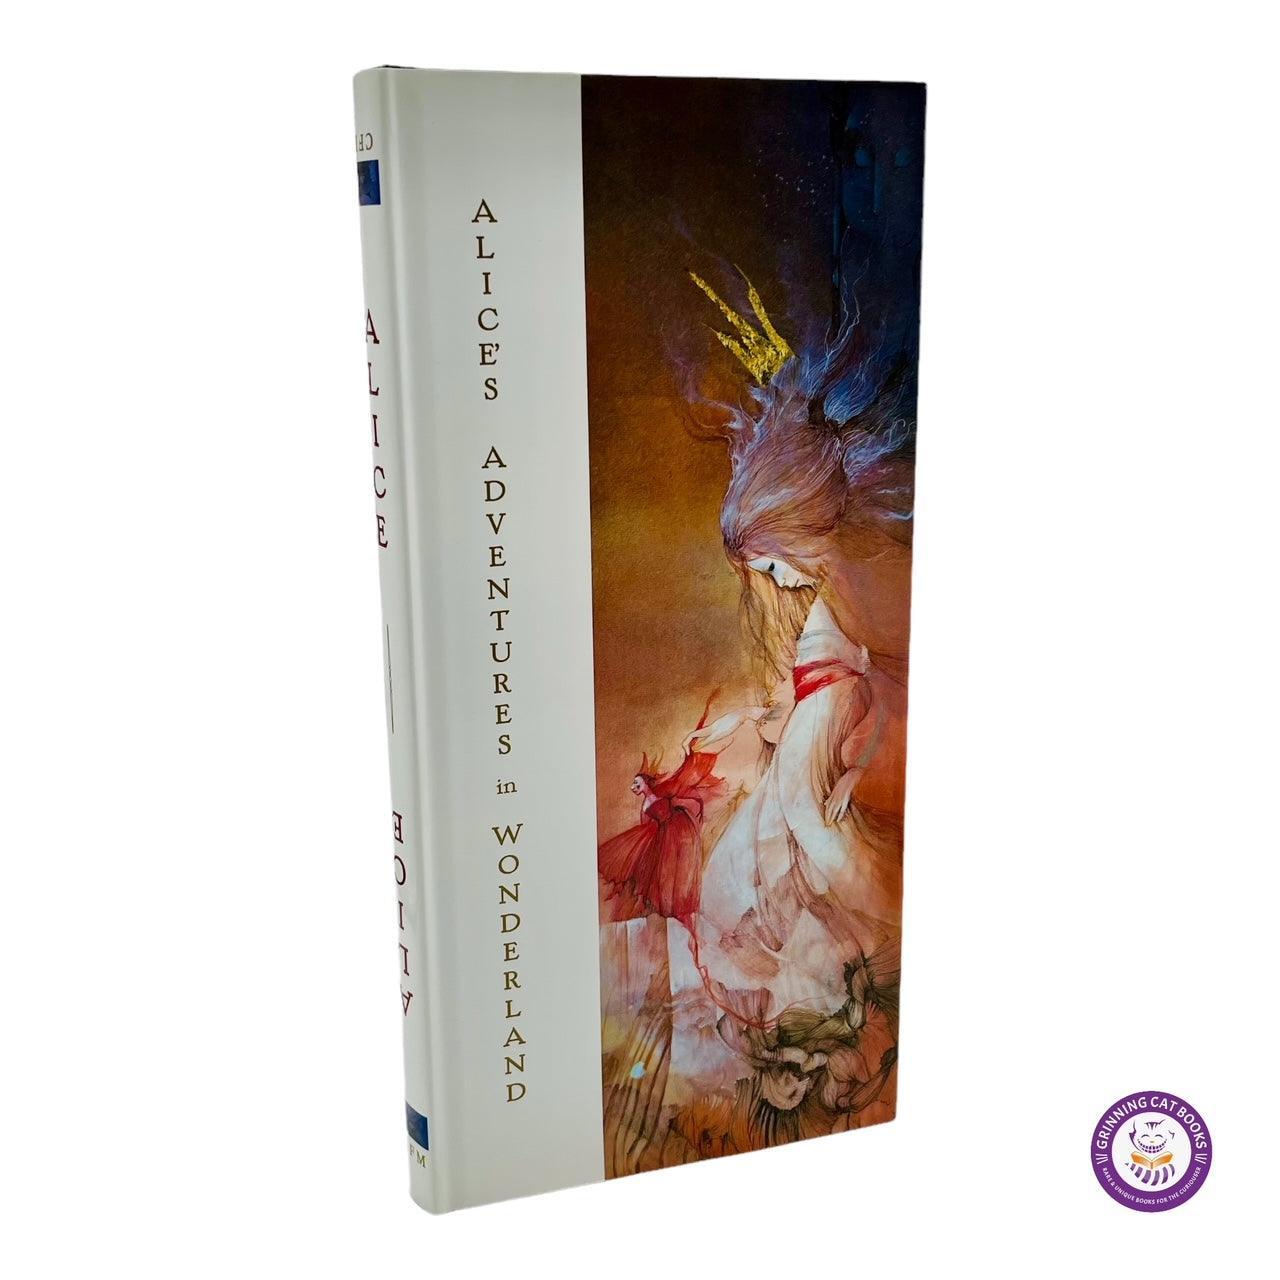 Alice in Wonderland & Through the Looking Glass (signed by artist, Anne Bachelier) - Grinning Cat Books - CHILDREN'S LITERATURE - ALICE, ENGLISH LITERATURE, SIGNED